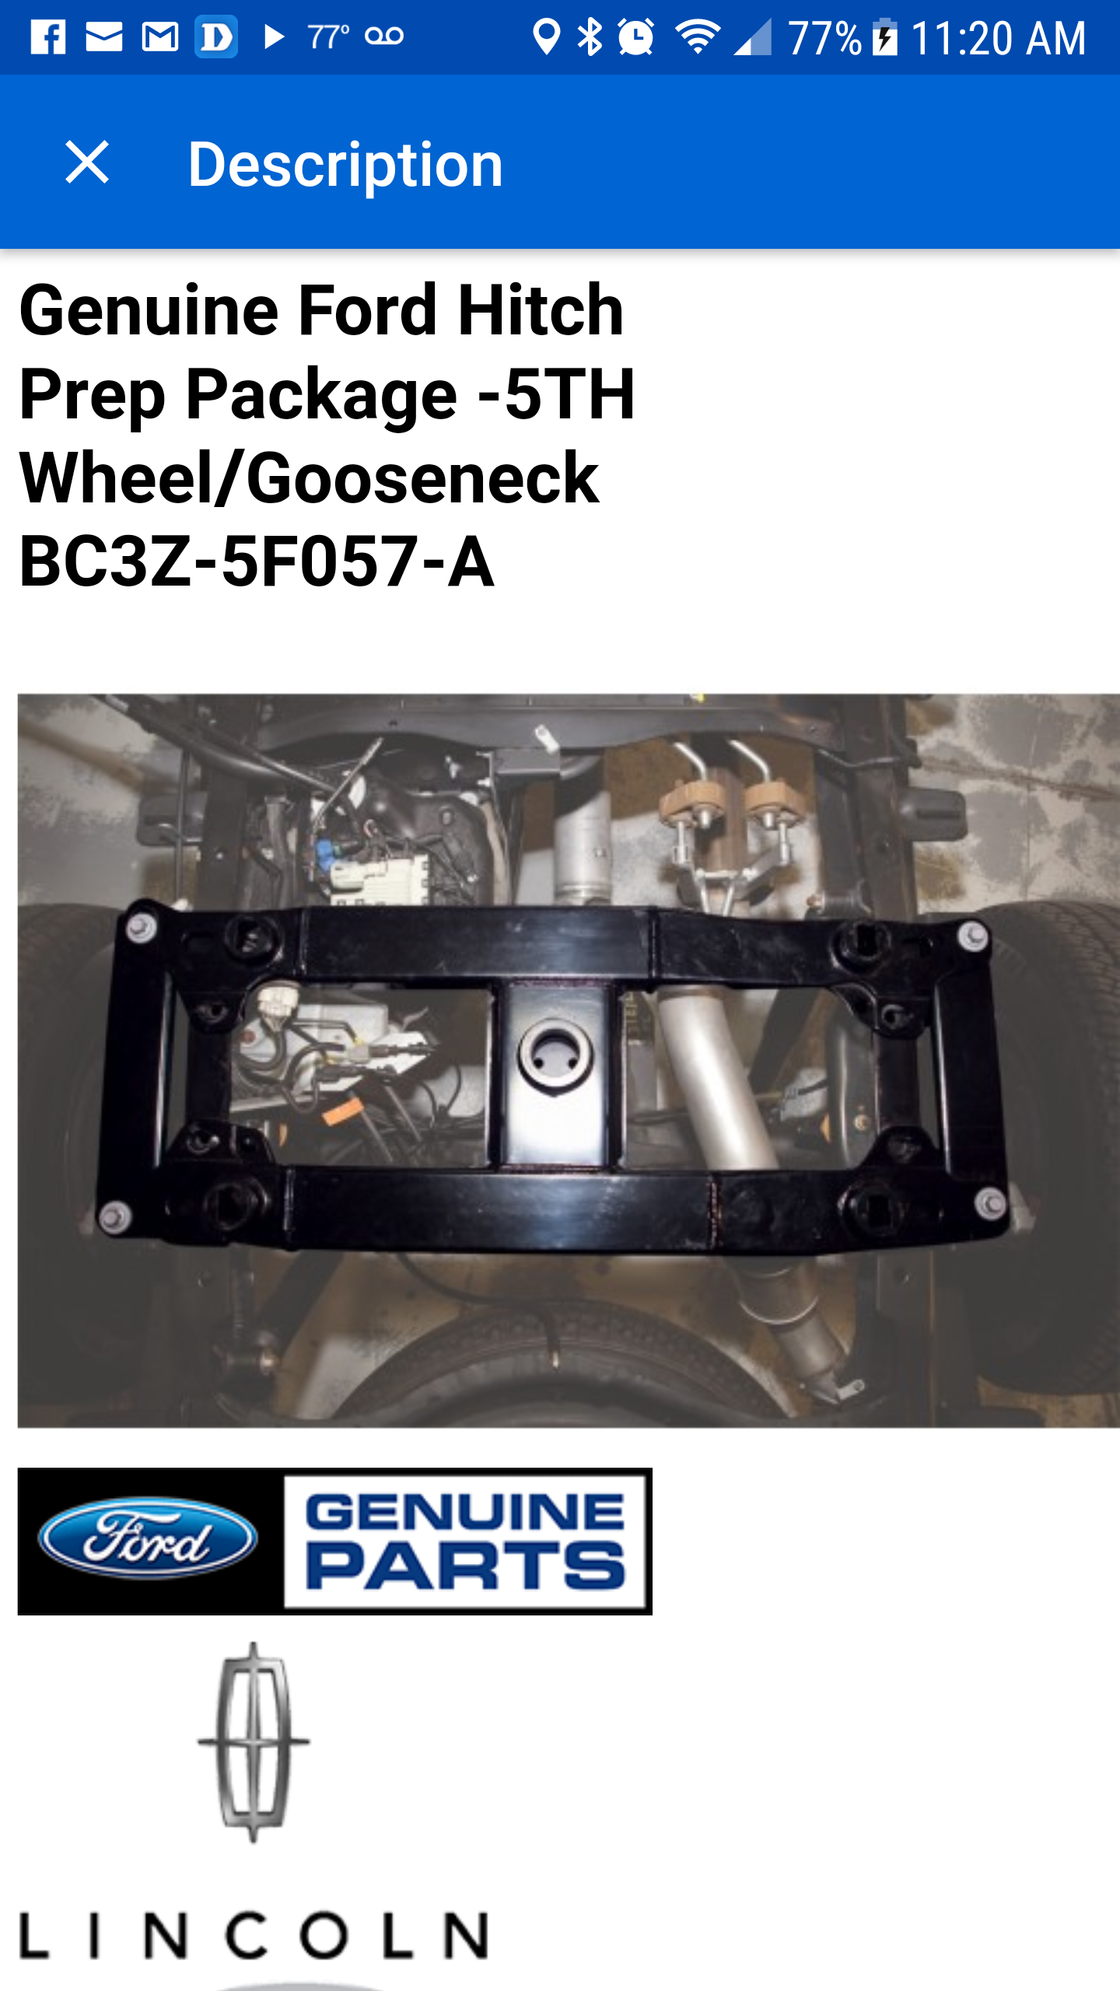 Oem 5th wheel gooseneck prep package - Ford Truck Enthusiasts Forums Ford Super Duty 5th Wheel Prep Package Plugs